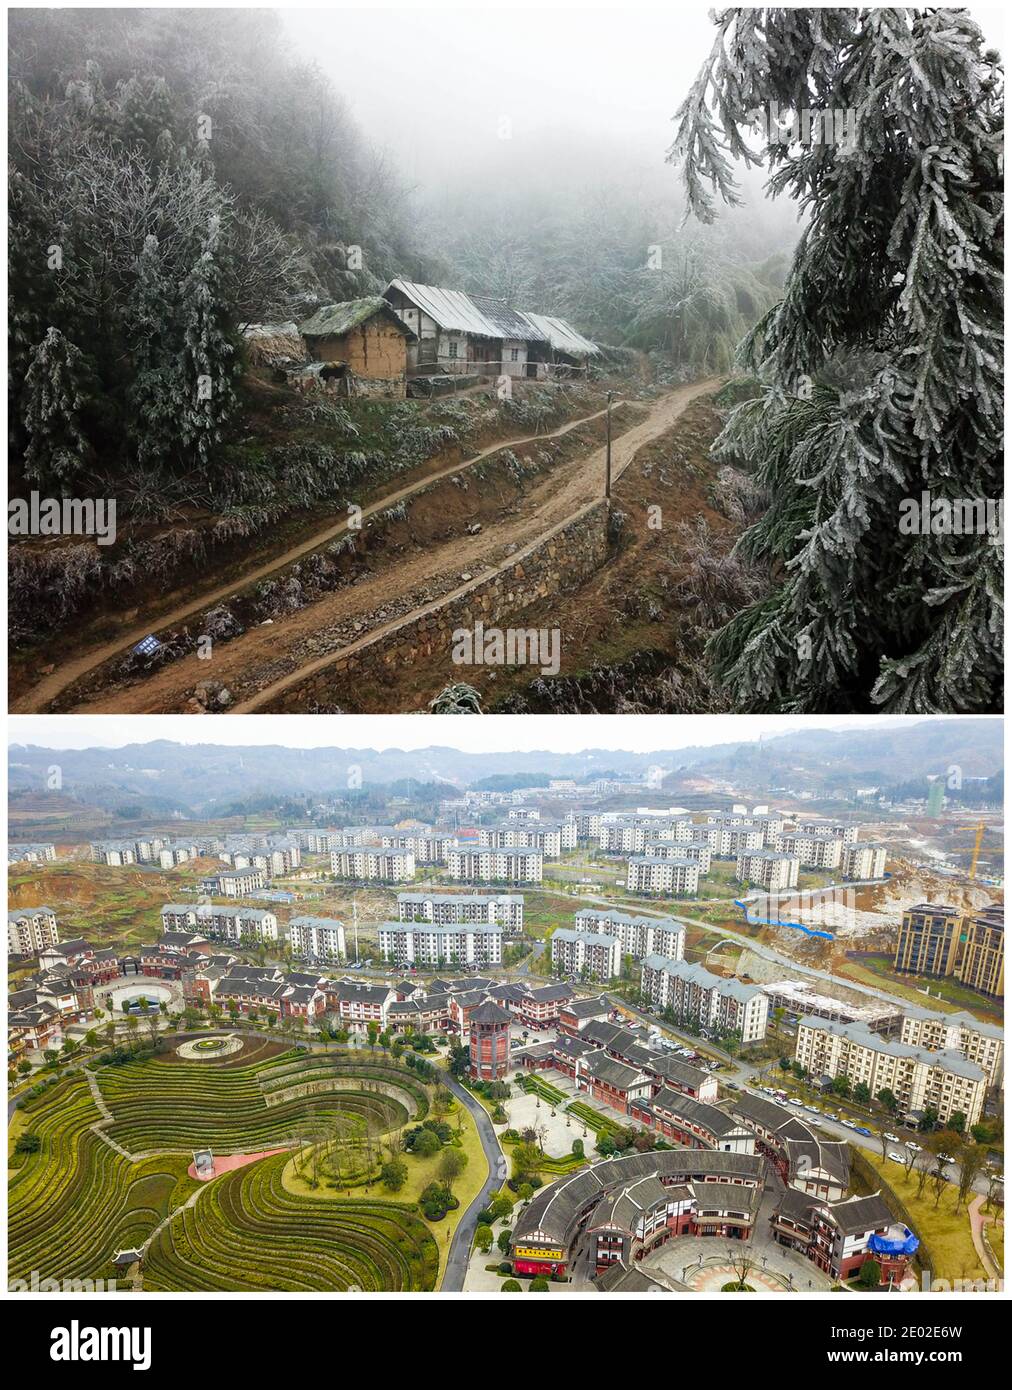 (201229) -- BIJIE, Dec. 29, 2020 (Xinhua) -- Combo aerial photo shows a walkway to Li Changde's old house at Hetou Village of Sanyuan Township in Dafang County, southwest China's Guizhou Province, on Dec. 13, 2018 (top) and a newly-built community, where Li now lives, for poverty alleviation relocation at Shexiang ancient township of Dafang County on Dec. 24, 2020. Li Siyu, 8, and his 6-year-old sister Li Qingyi, formerly lived at Hetou Village as members of a poverty-stricken household. They had to spend nearly an hour walking to school everyday. Their parents worked at other cities and Li Ch Stock Photo